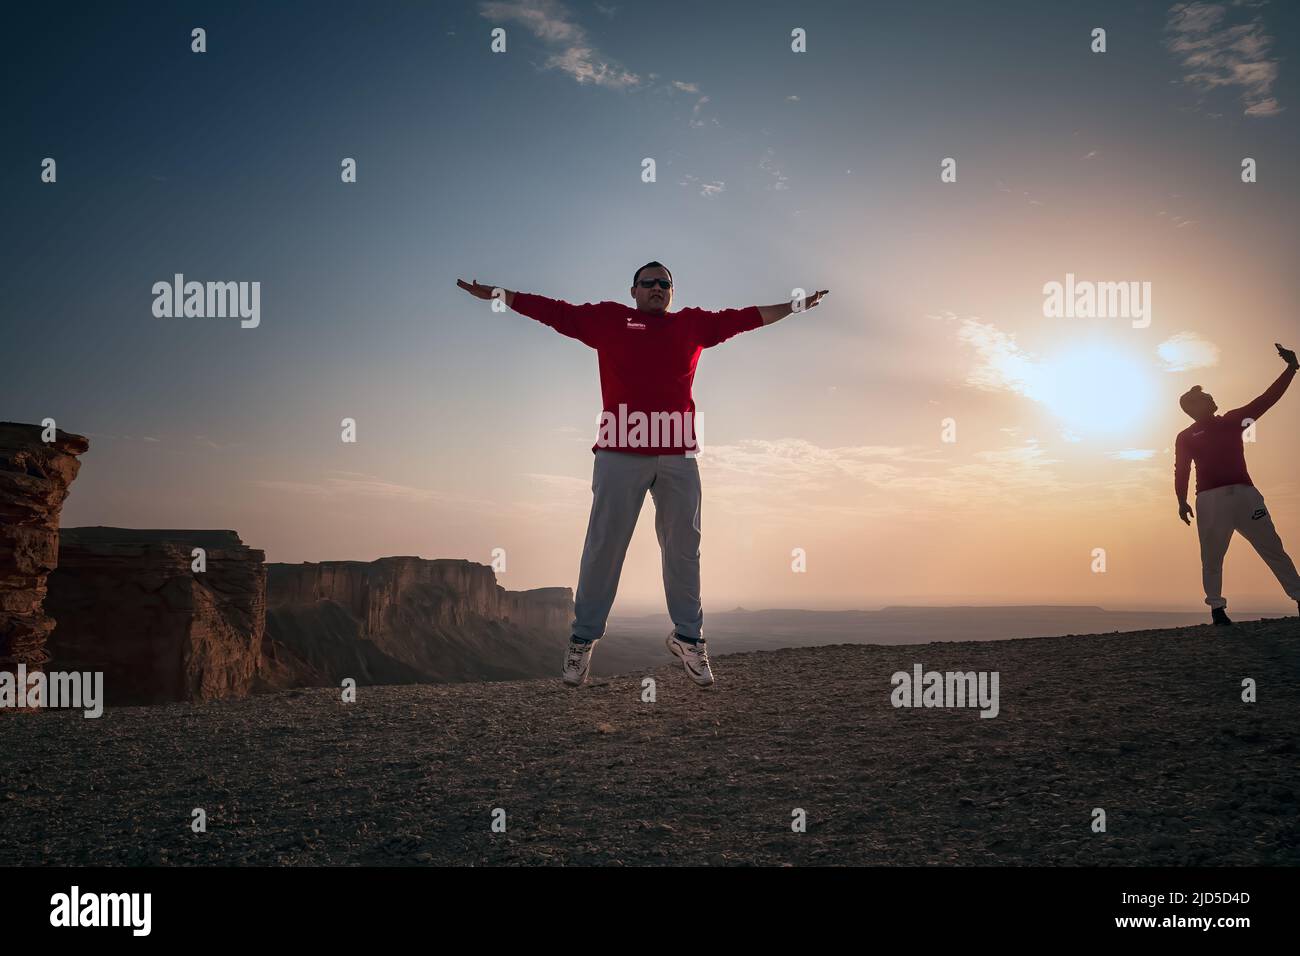 Happy Man jumping silhoutte poses with beautiful sunset background in Edge of the world Riyadh Saudi Arabia. Stock Photo